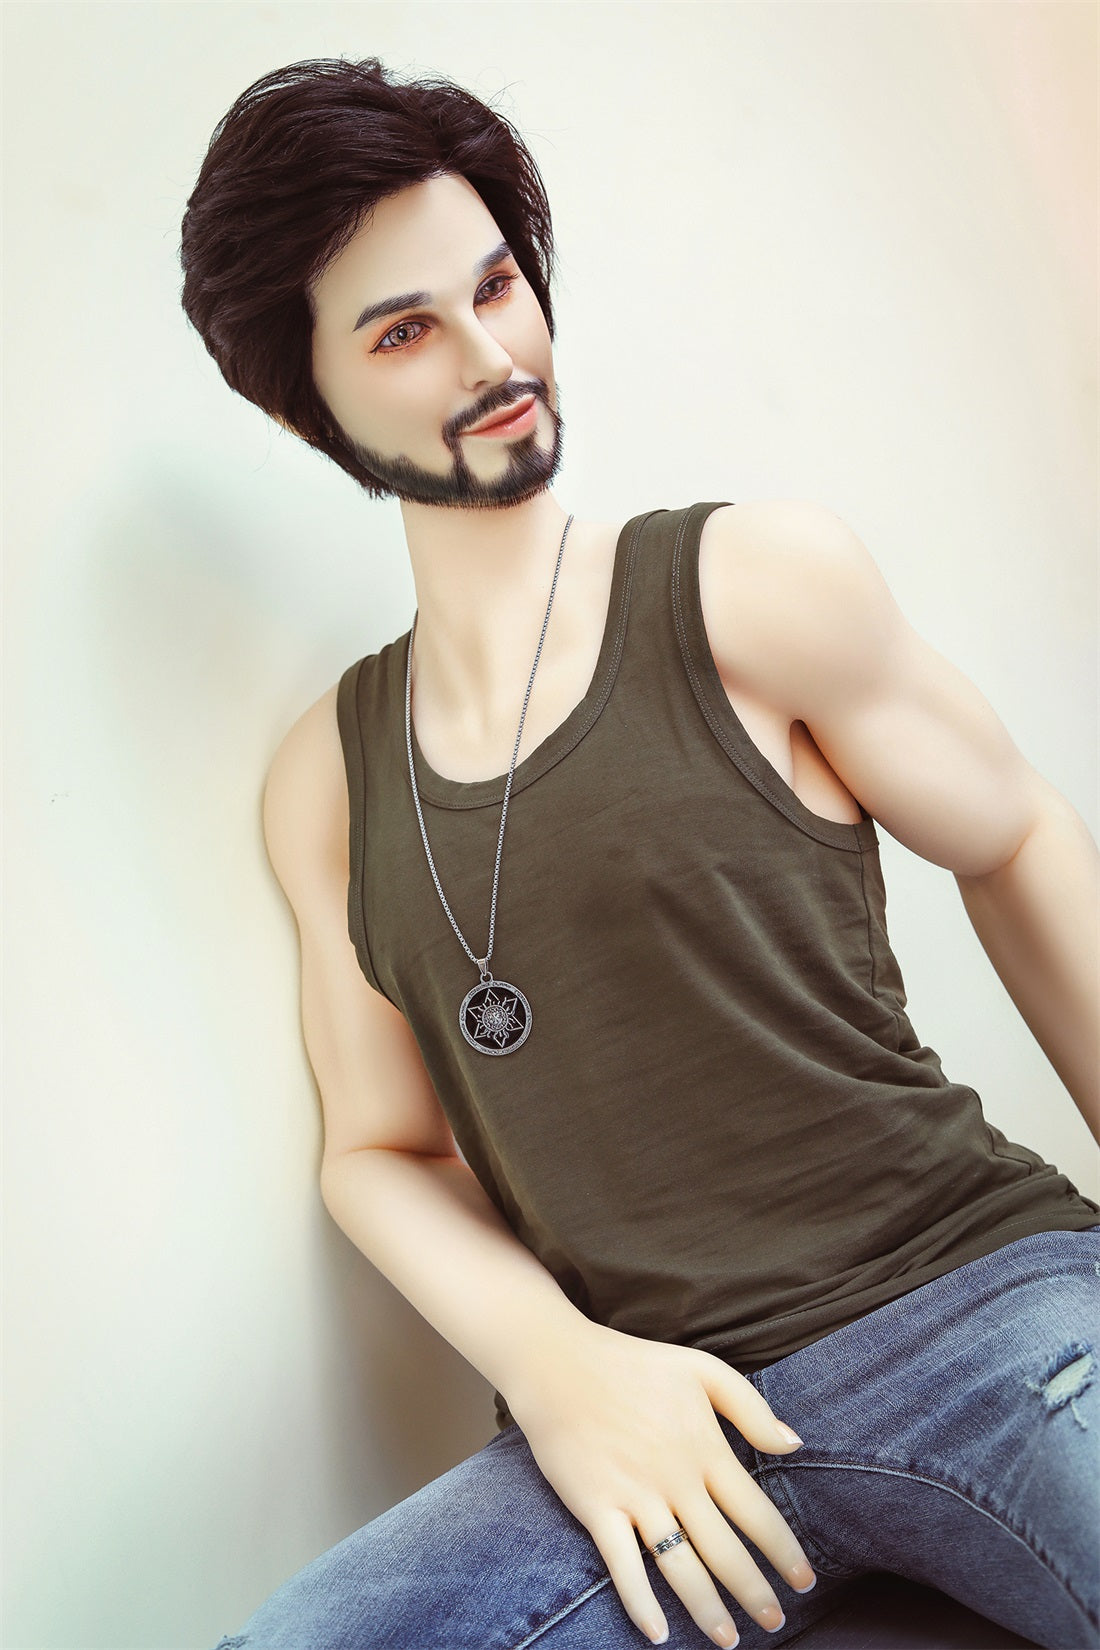 SY Doll 5ft 4 /162cm Enthusiastic Bearded Style Male Sex Doll For Women-Micheal